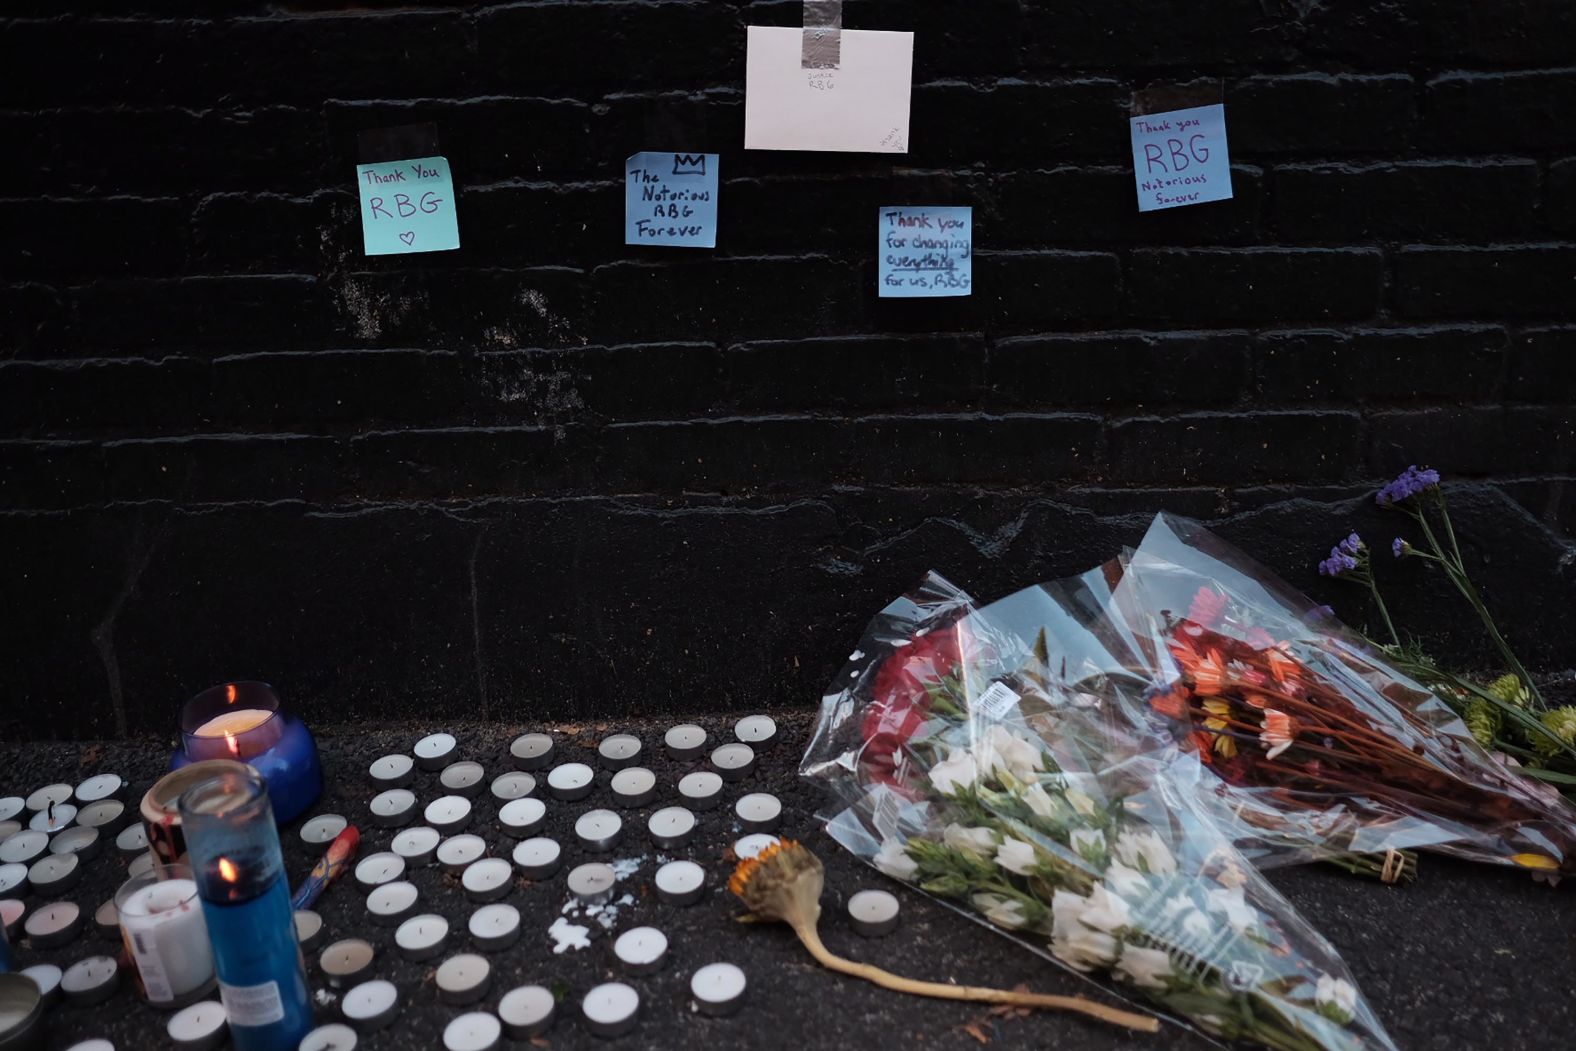 Mourners created a memorial underneath the Ginsburg mural.